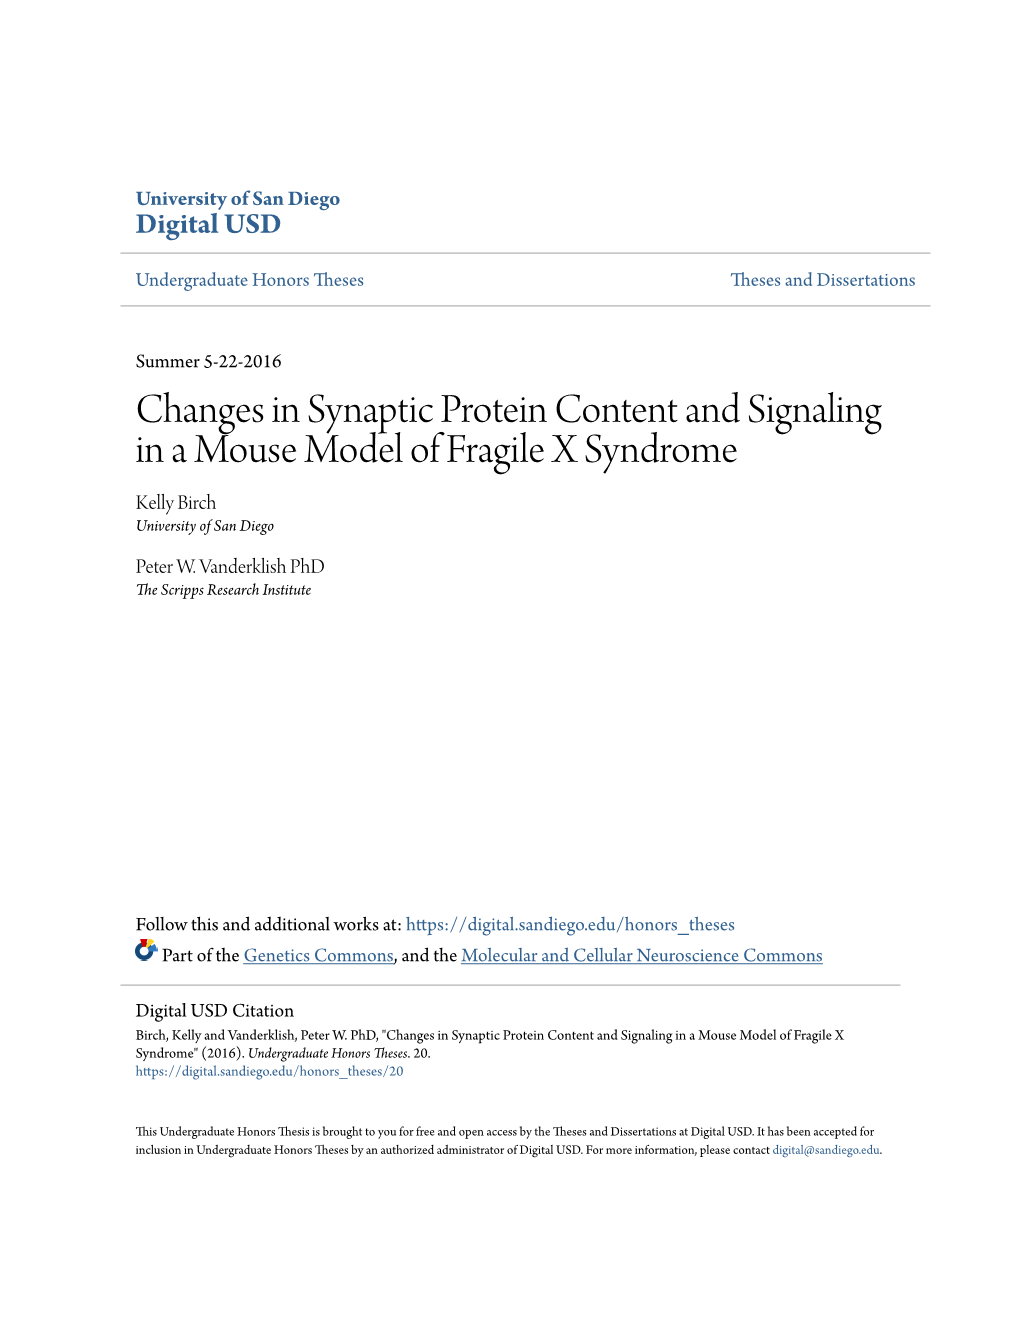 Changes in Synaptic Protein Content and Signaling in a Mouse Model of Fragile X Syndrome Kelly Birch University of San Diego